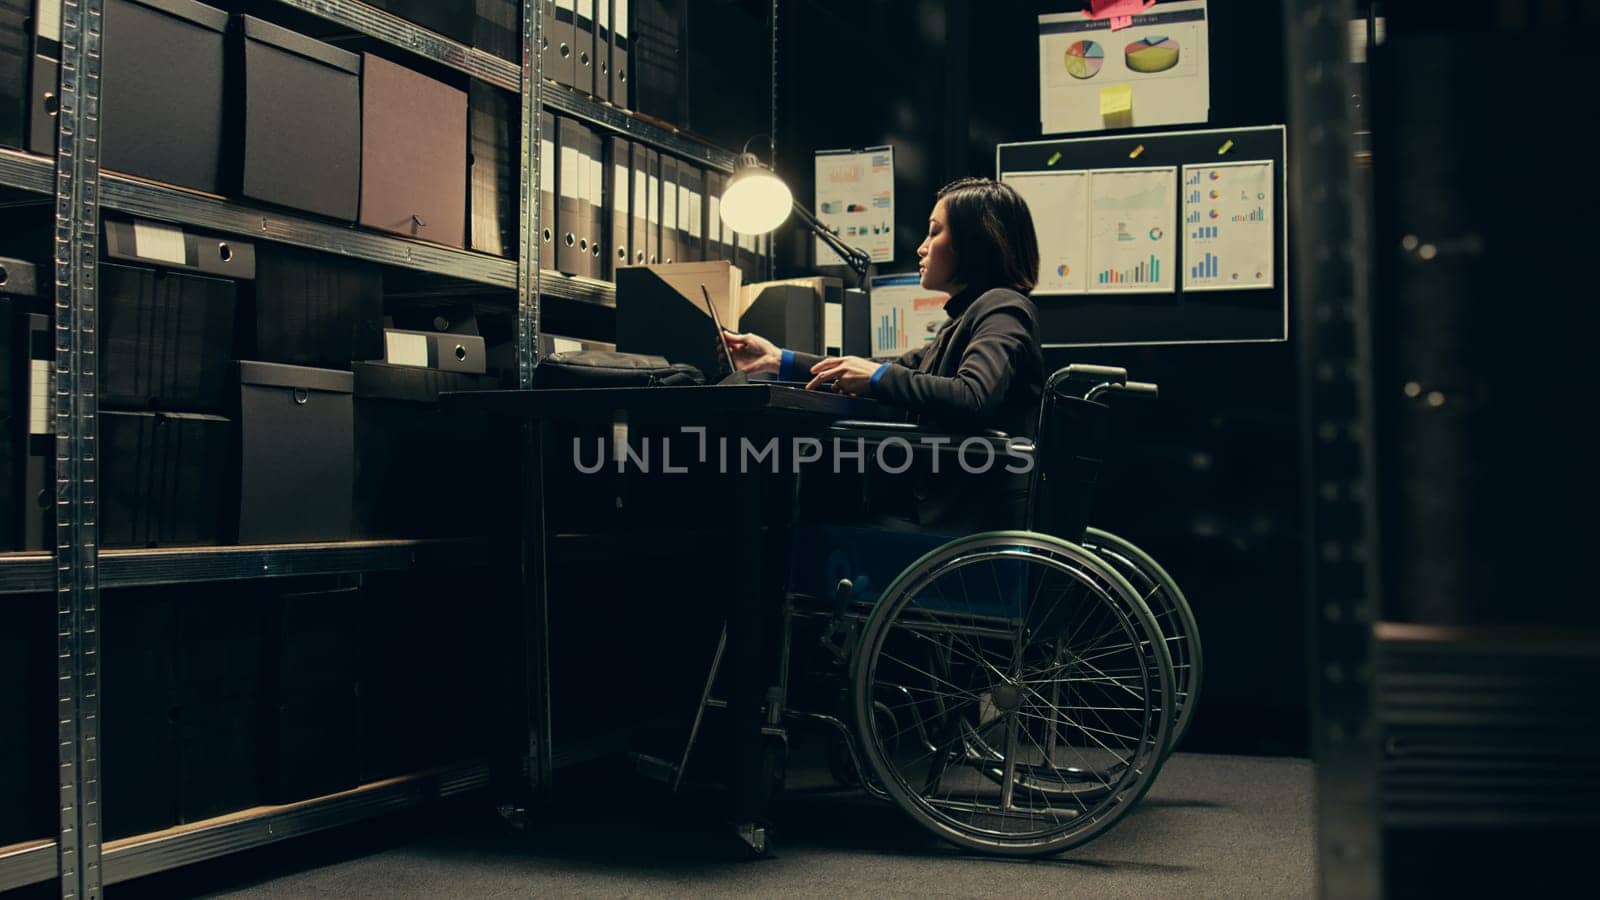 Wheelchair user conducting private investigation in disability friendly incident room, examining old cases to find connections. Detectives gathering legal information for identification. Camera B.